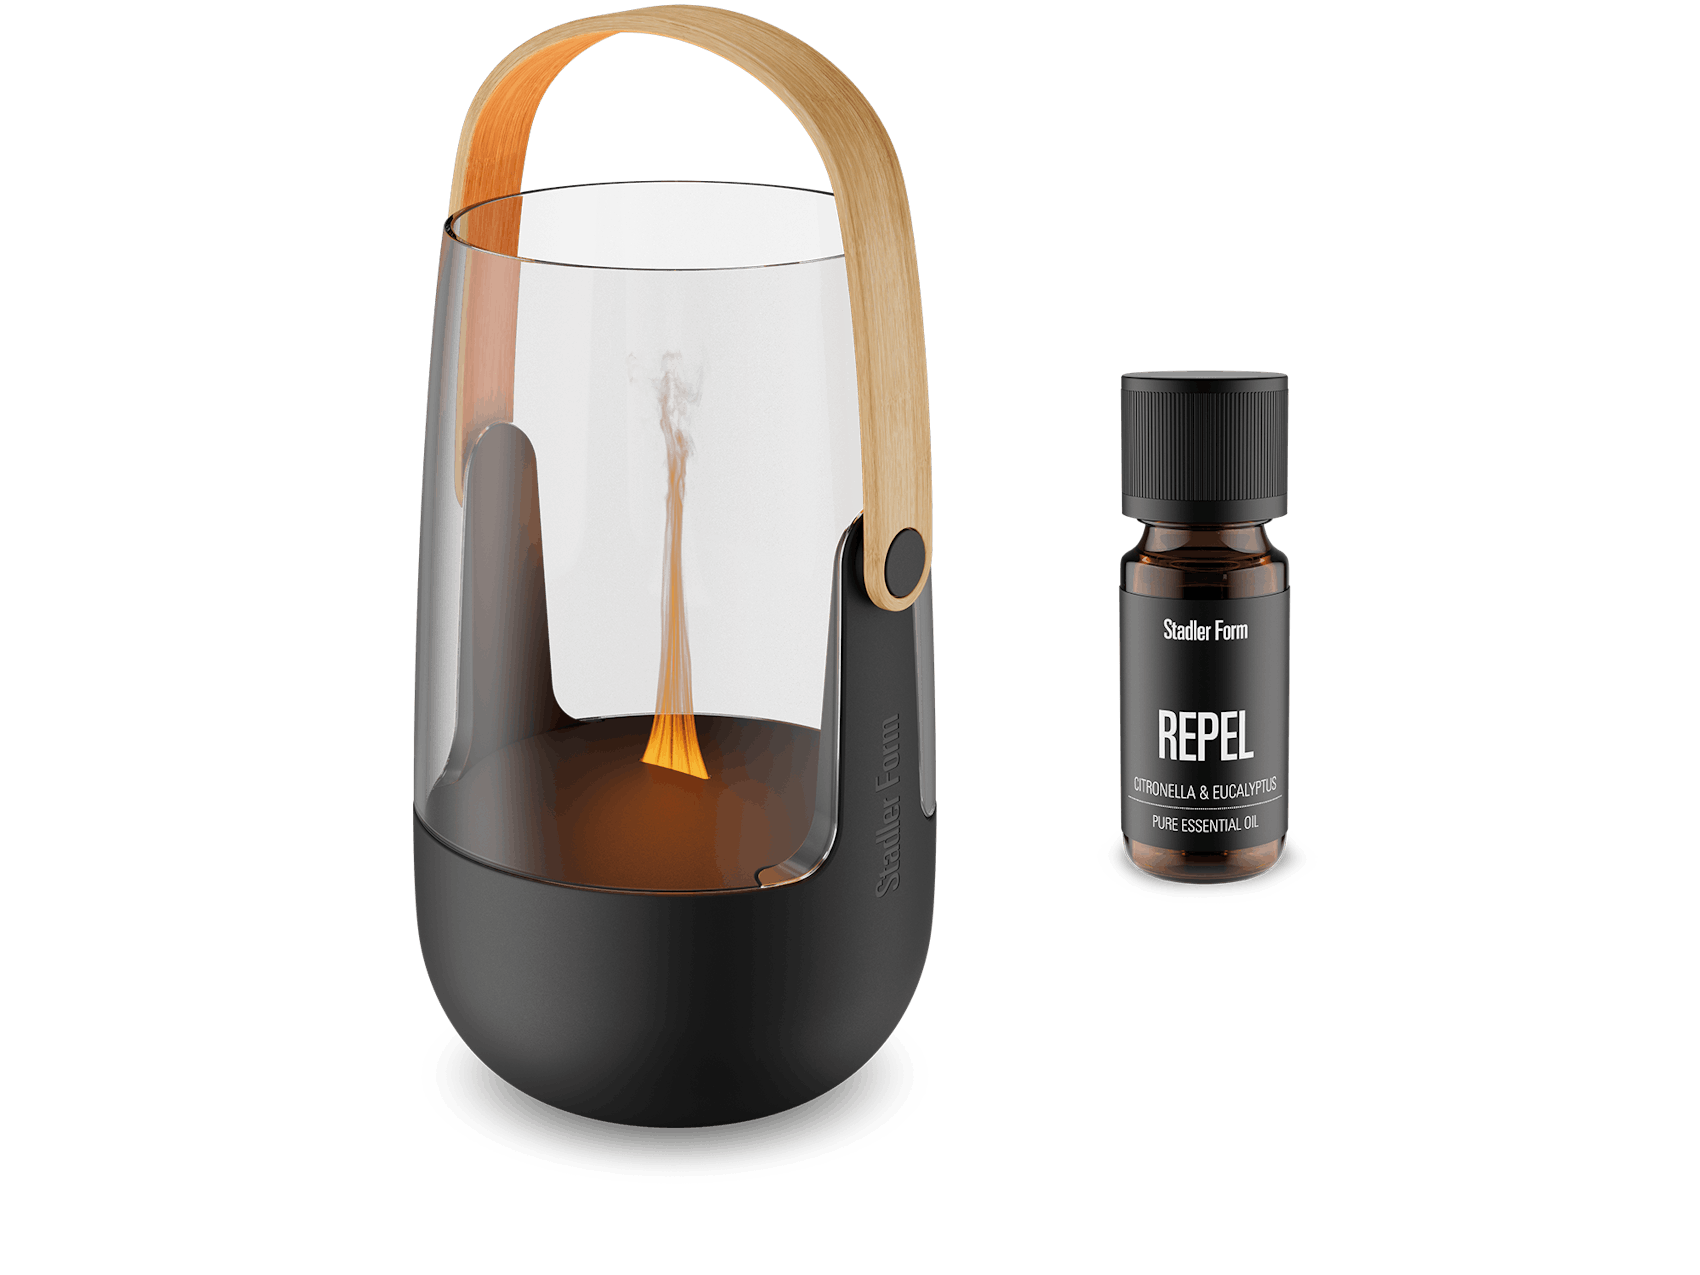 Sophie aroma diffuser bundle by Stadler Form with Repel essential oil